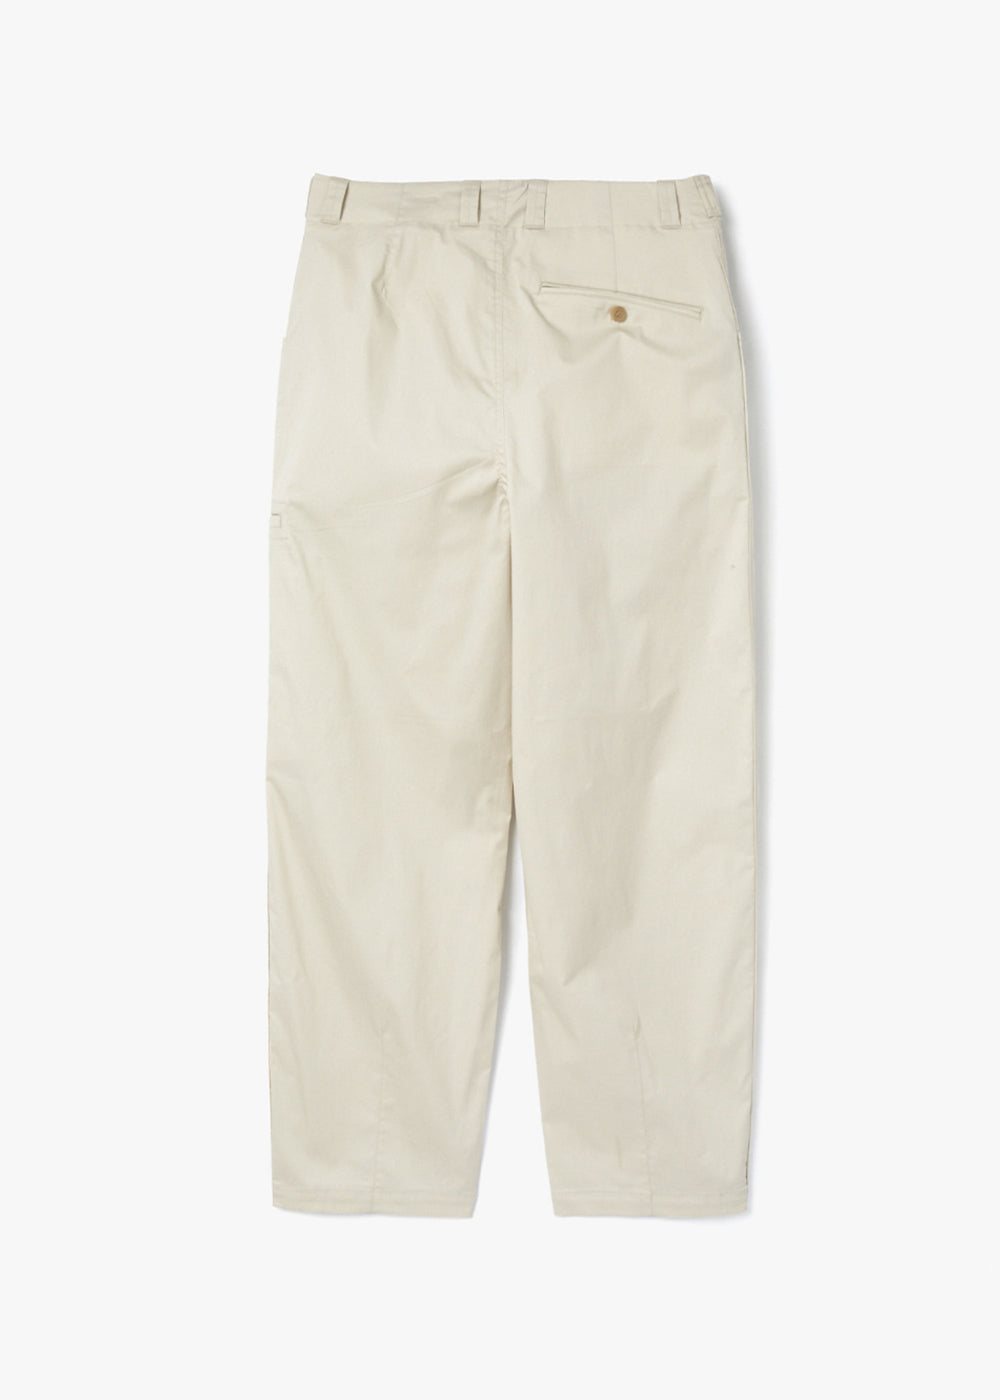 COATING COTTON BELTED PANTS_CREAM